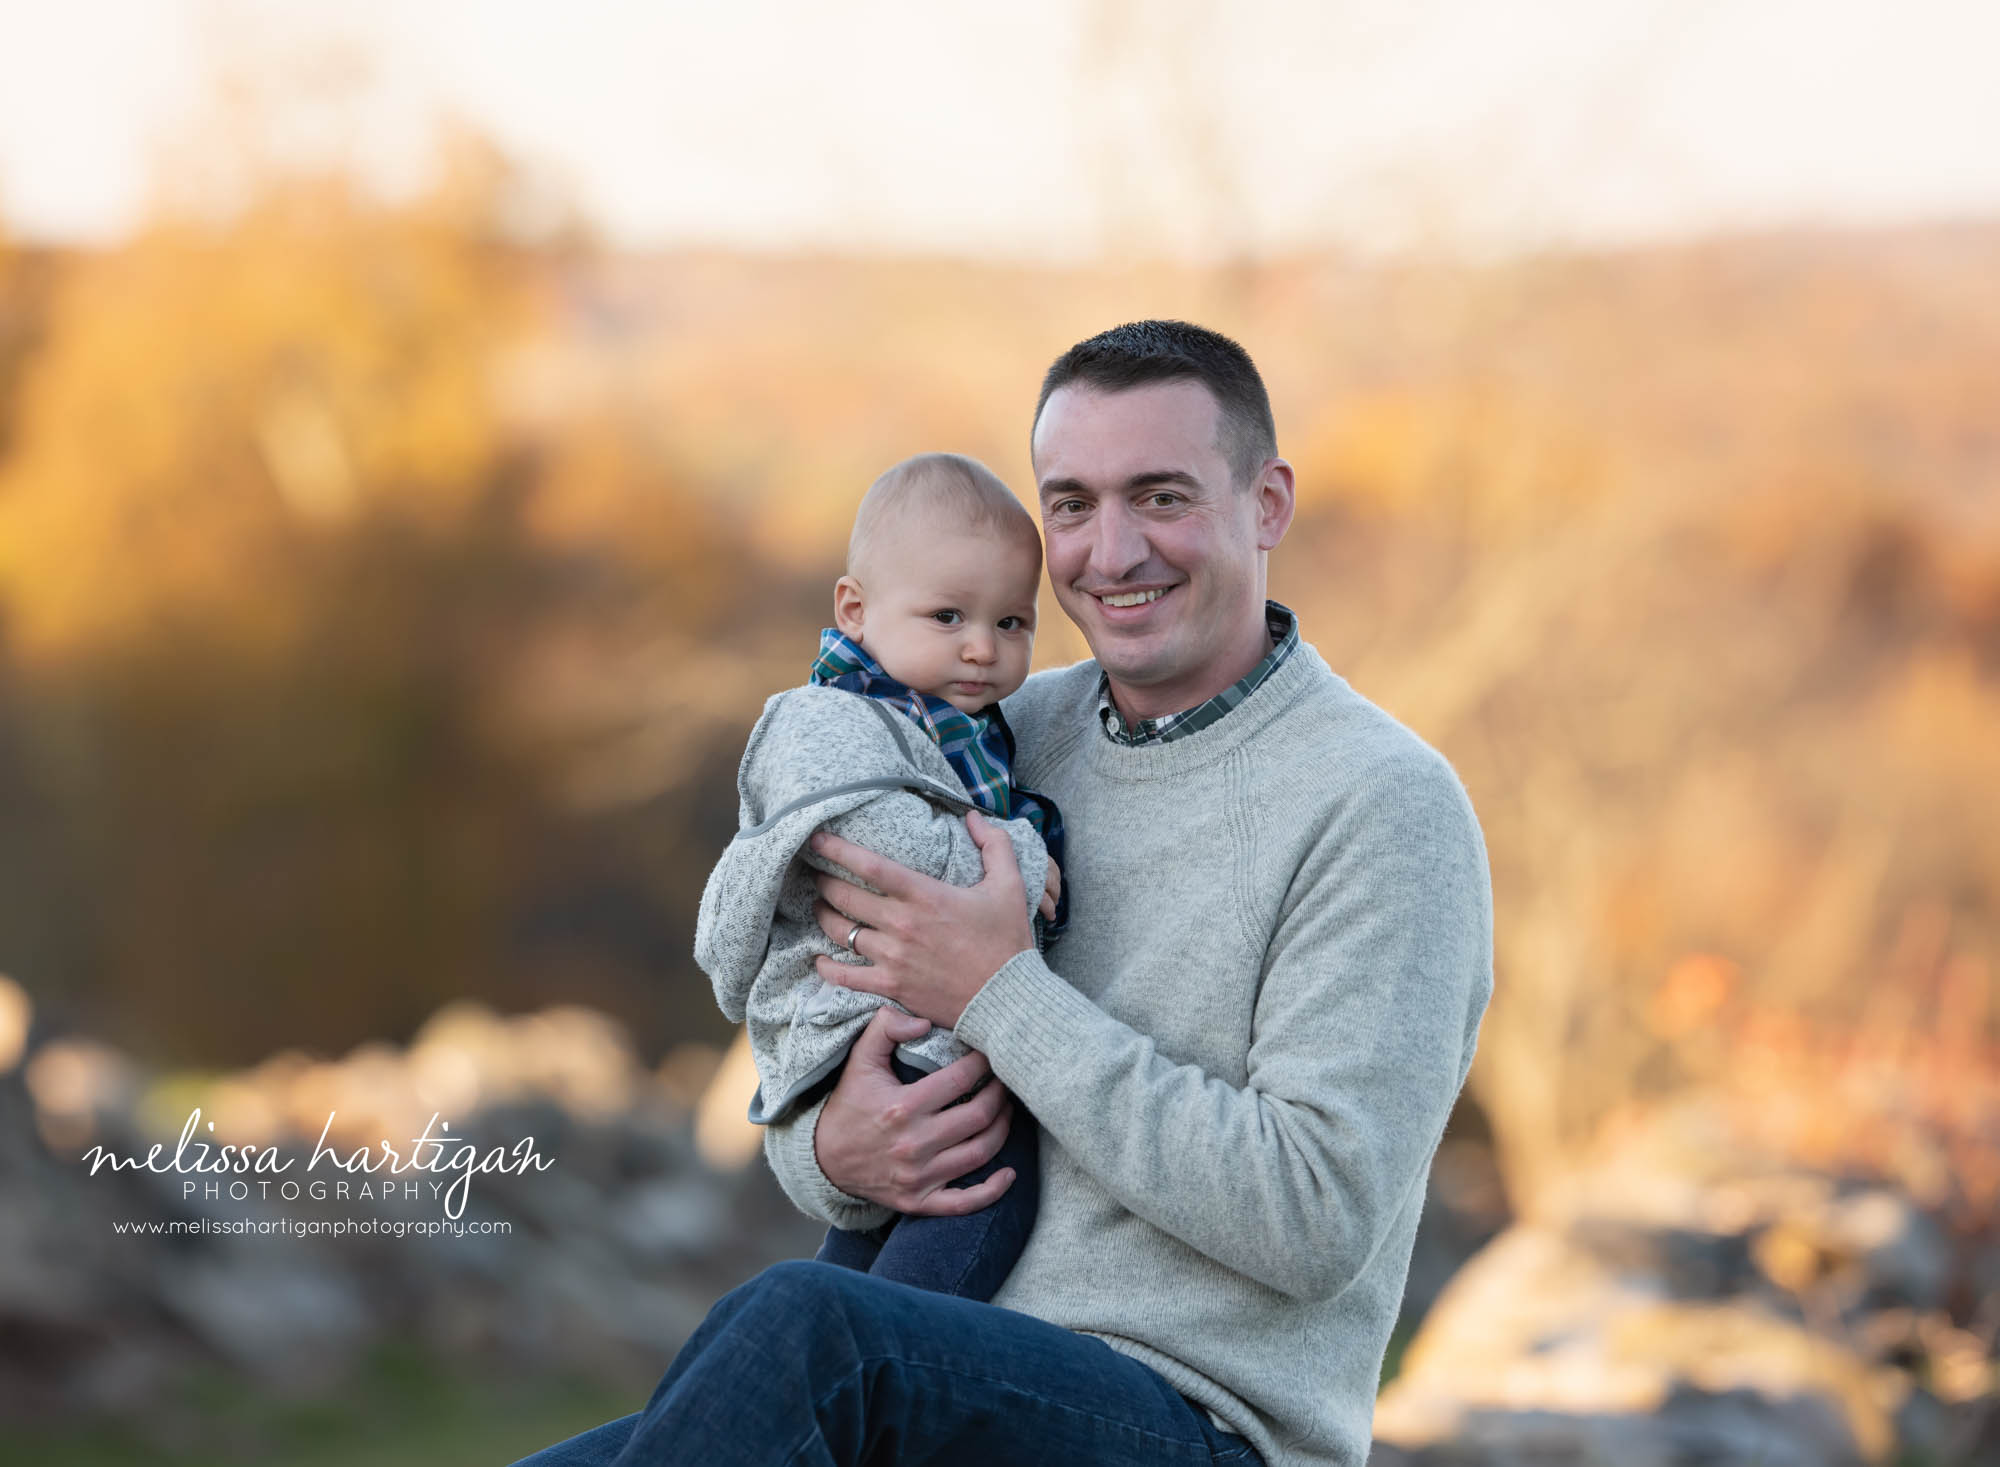 Dad holding his baby boy during family session outdoors in fall